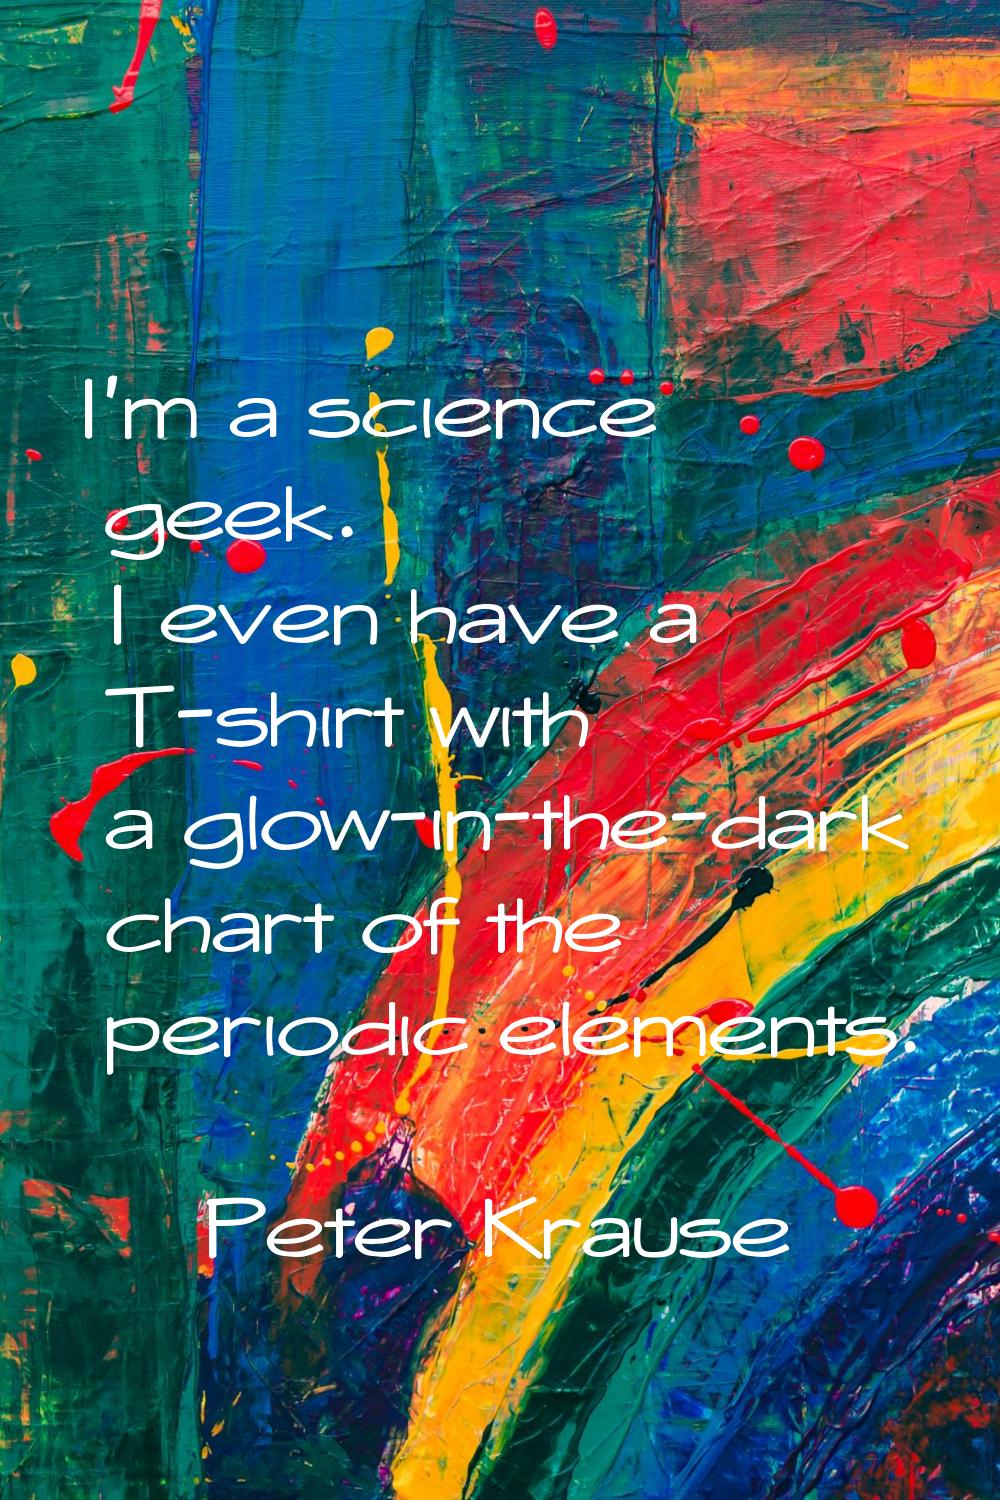 I'm a science geek. I even have a T-shirt with a glow-in-the-dark chart of the periodic elements.